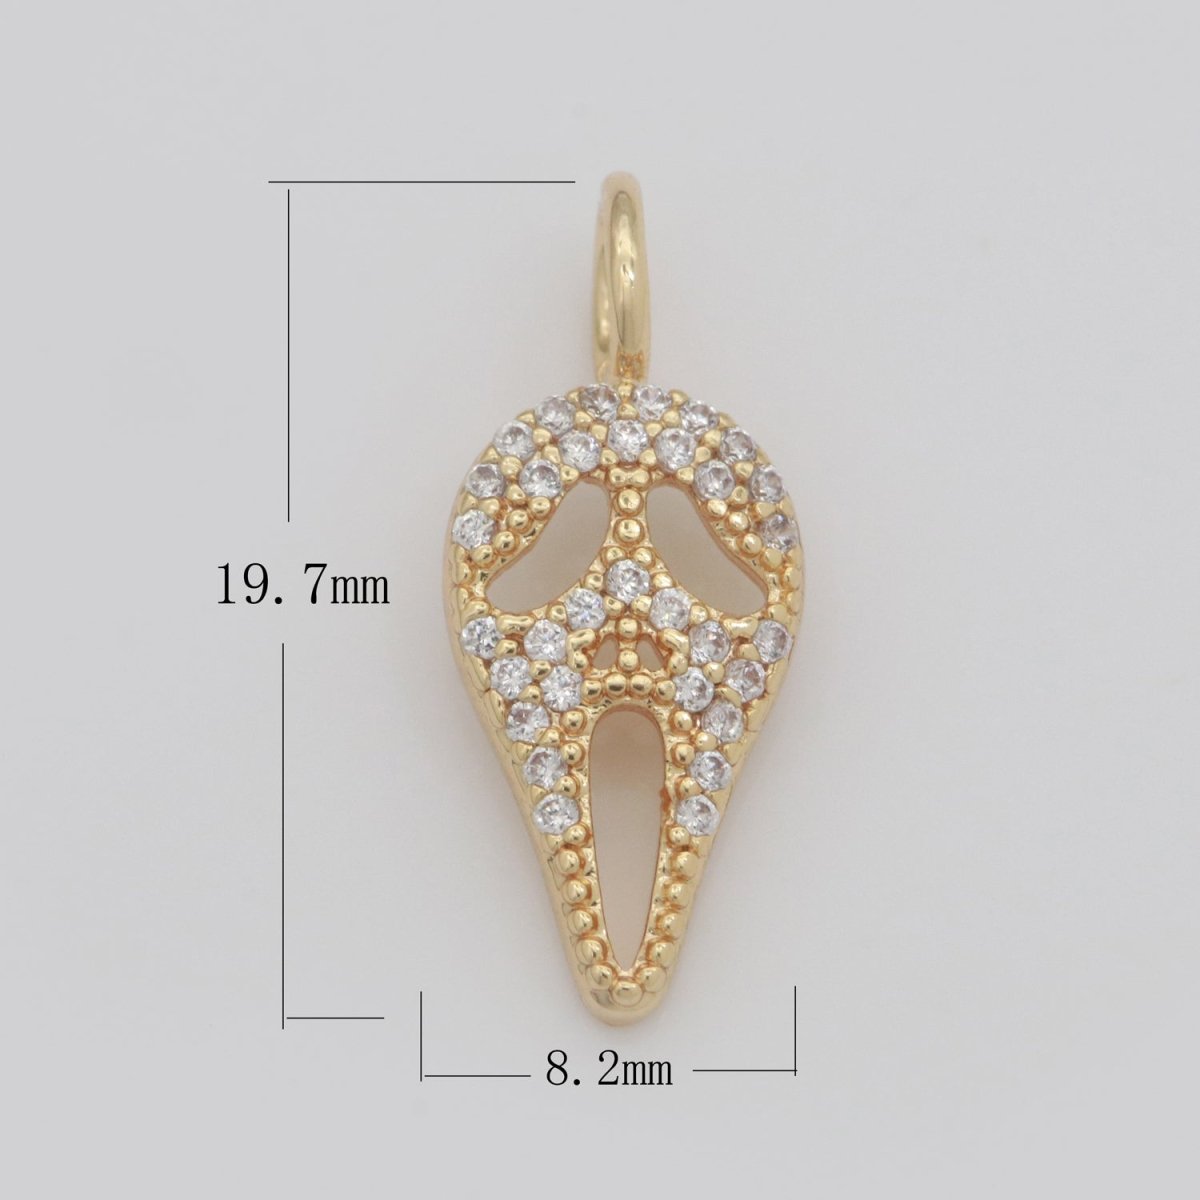 Dainty 18K Gold Filled Scream Mask Charm Micro Pave Skull Dia De Los Muertos Charm for Halloween Jewelry Inspired M-740 - DLUXCA